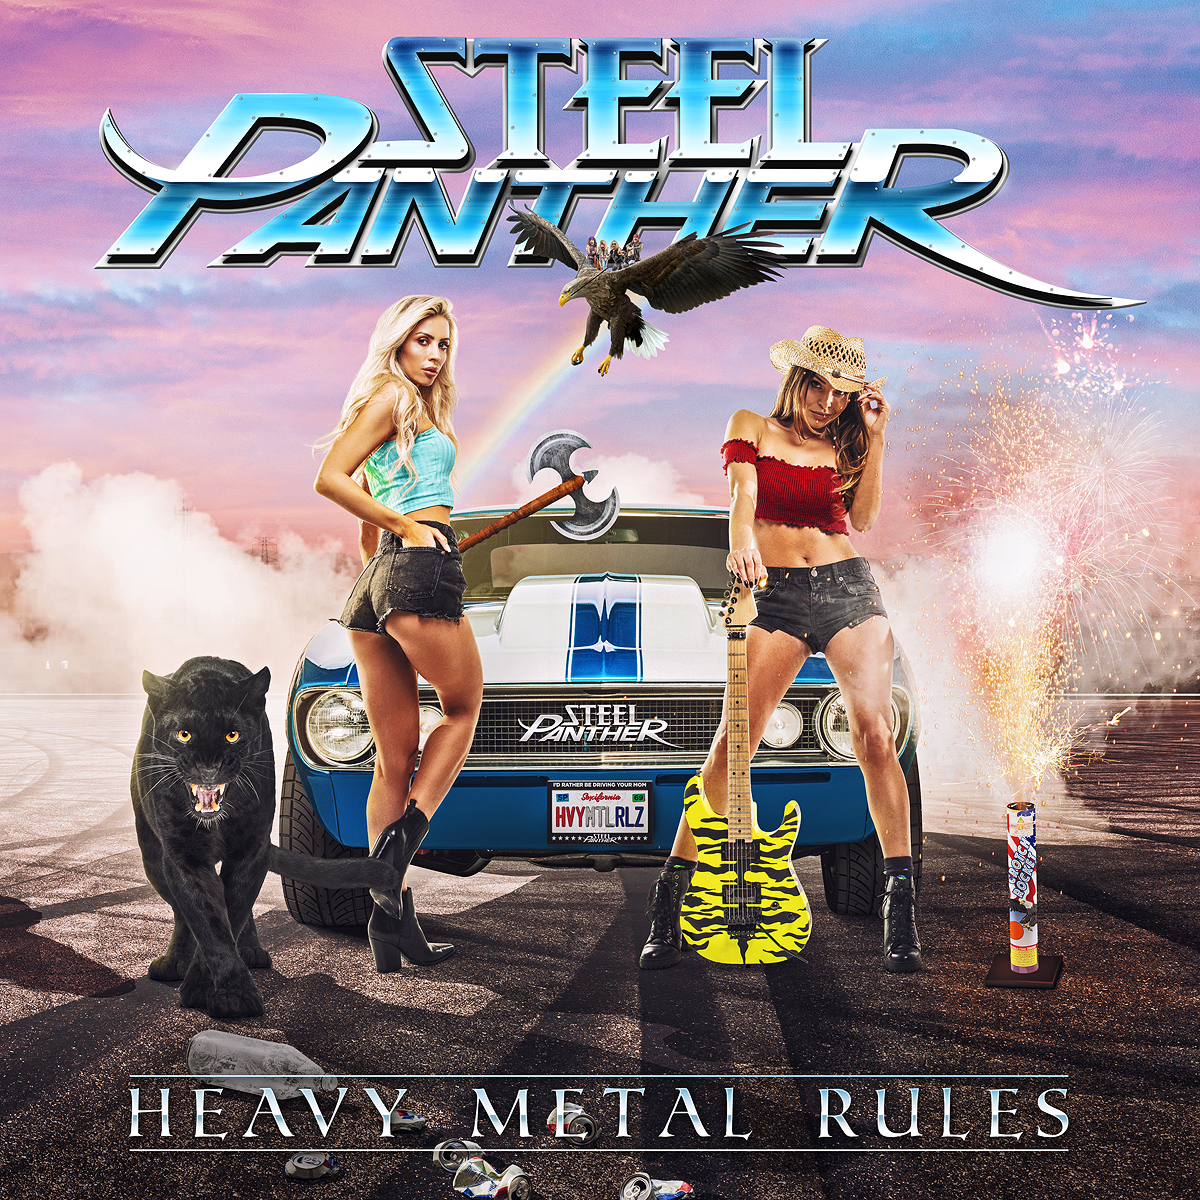 SteelPanther_HeavyMetalRules_Cover_1200px